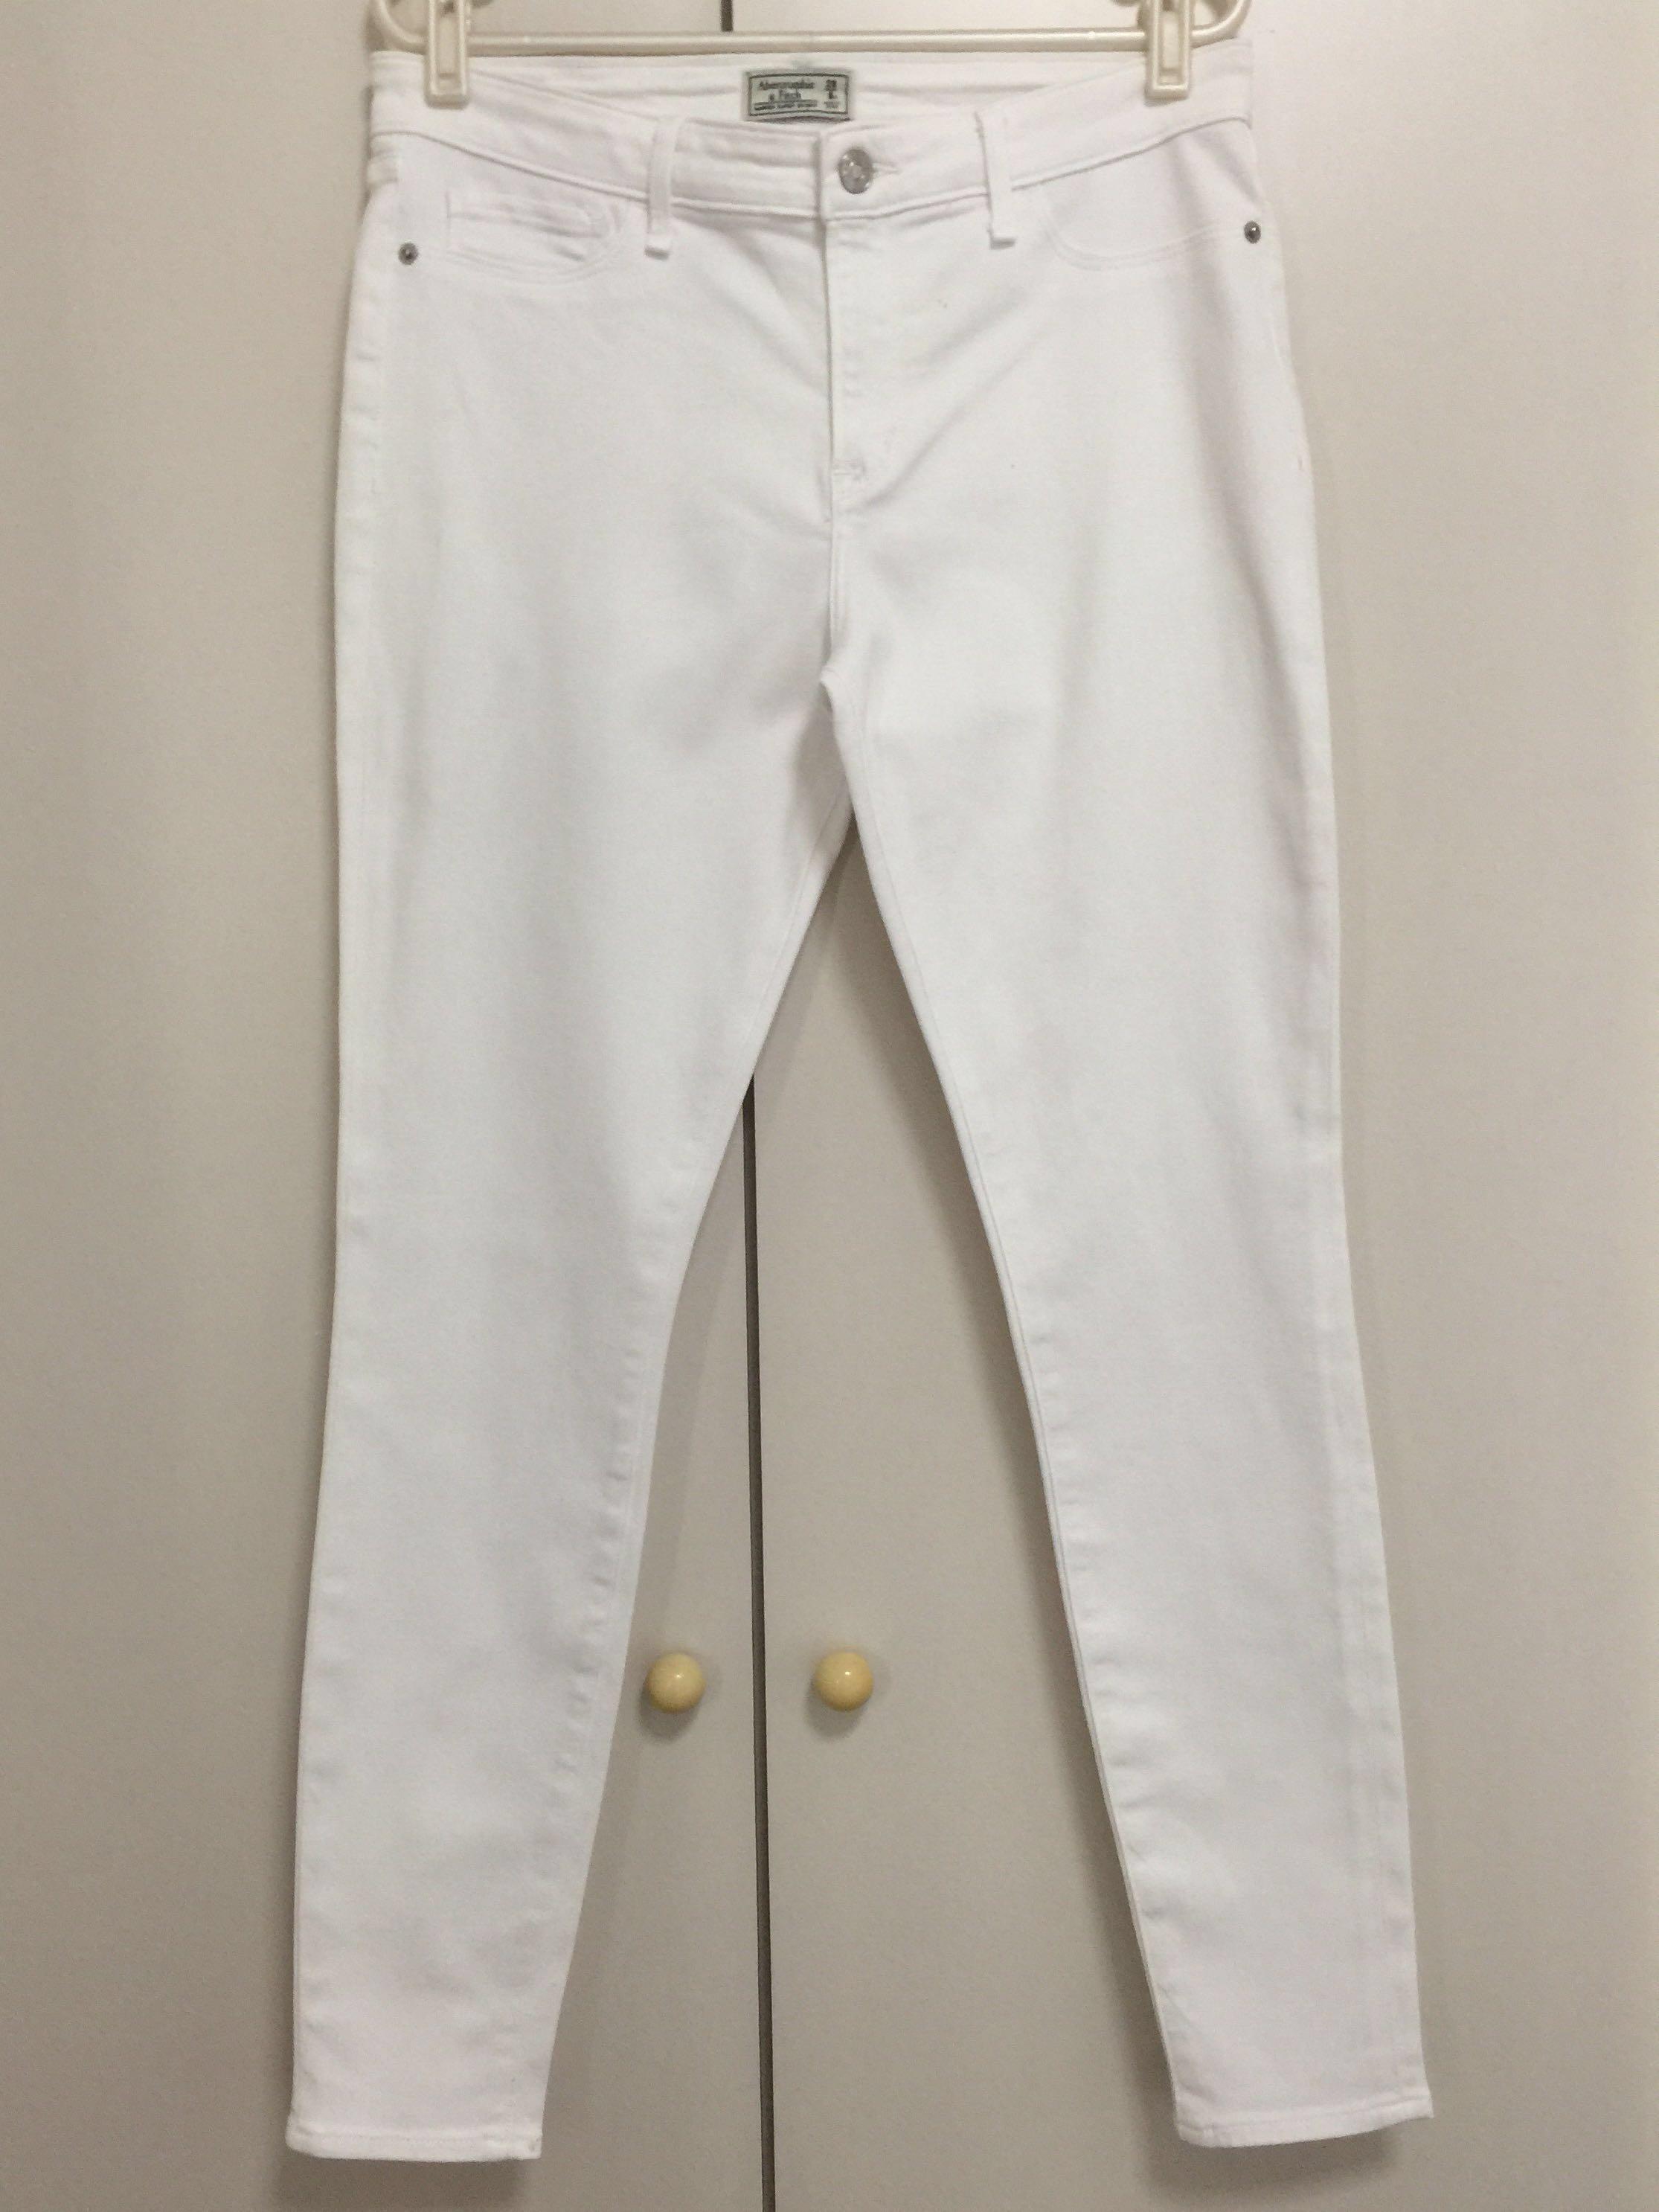 abercrombie and fitch white jeans